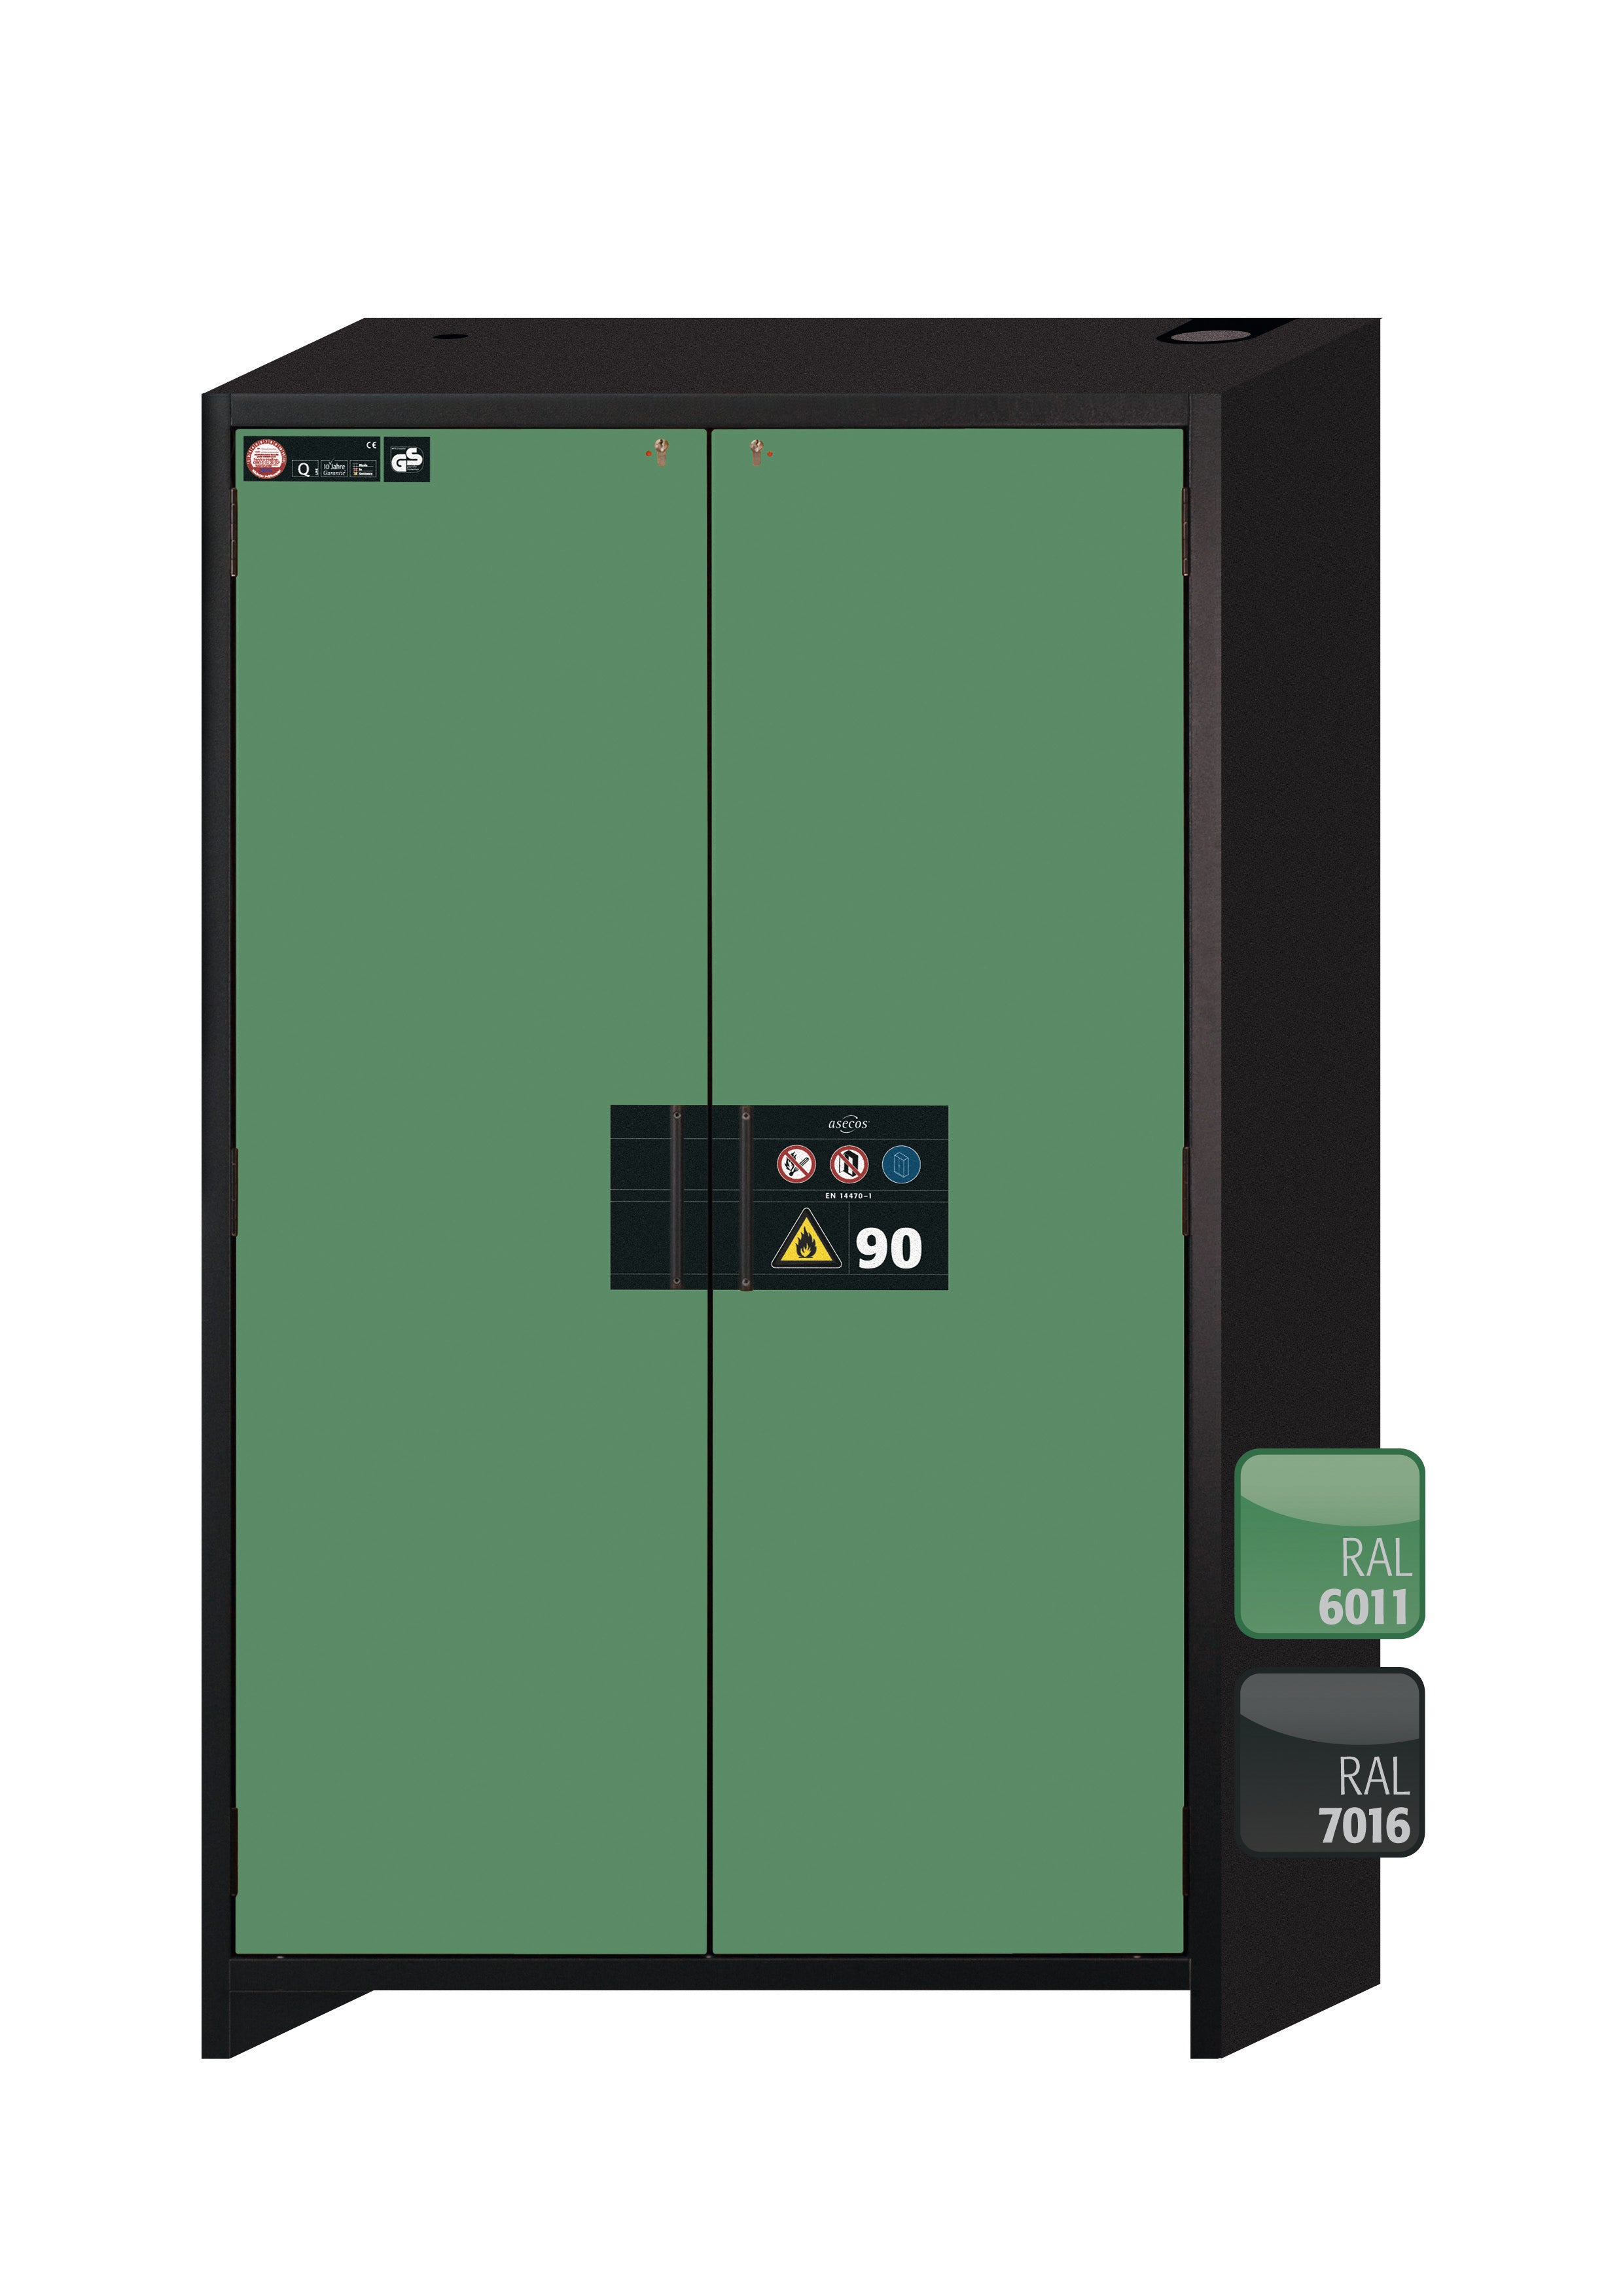 Type 90 safety storage cabinet Q-CLASSIC-90 model Q90.195.120 in reseda green RAL 6011 with 3x drawer (standard) (stainless steel 1.4301),